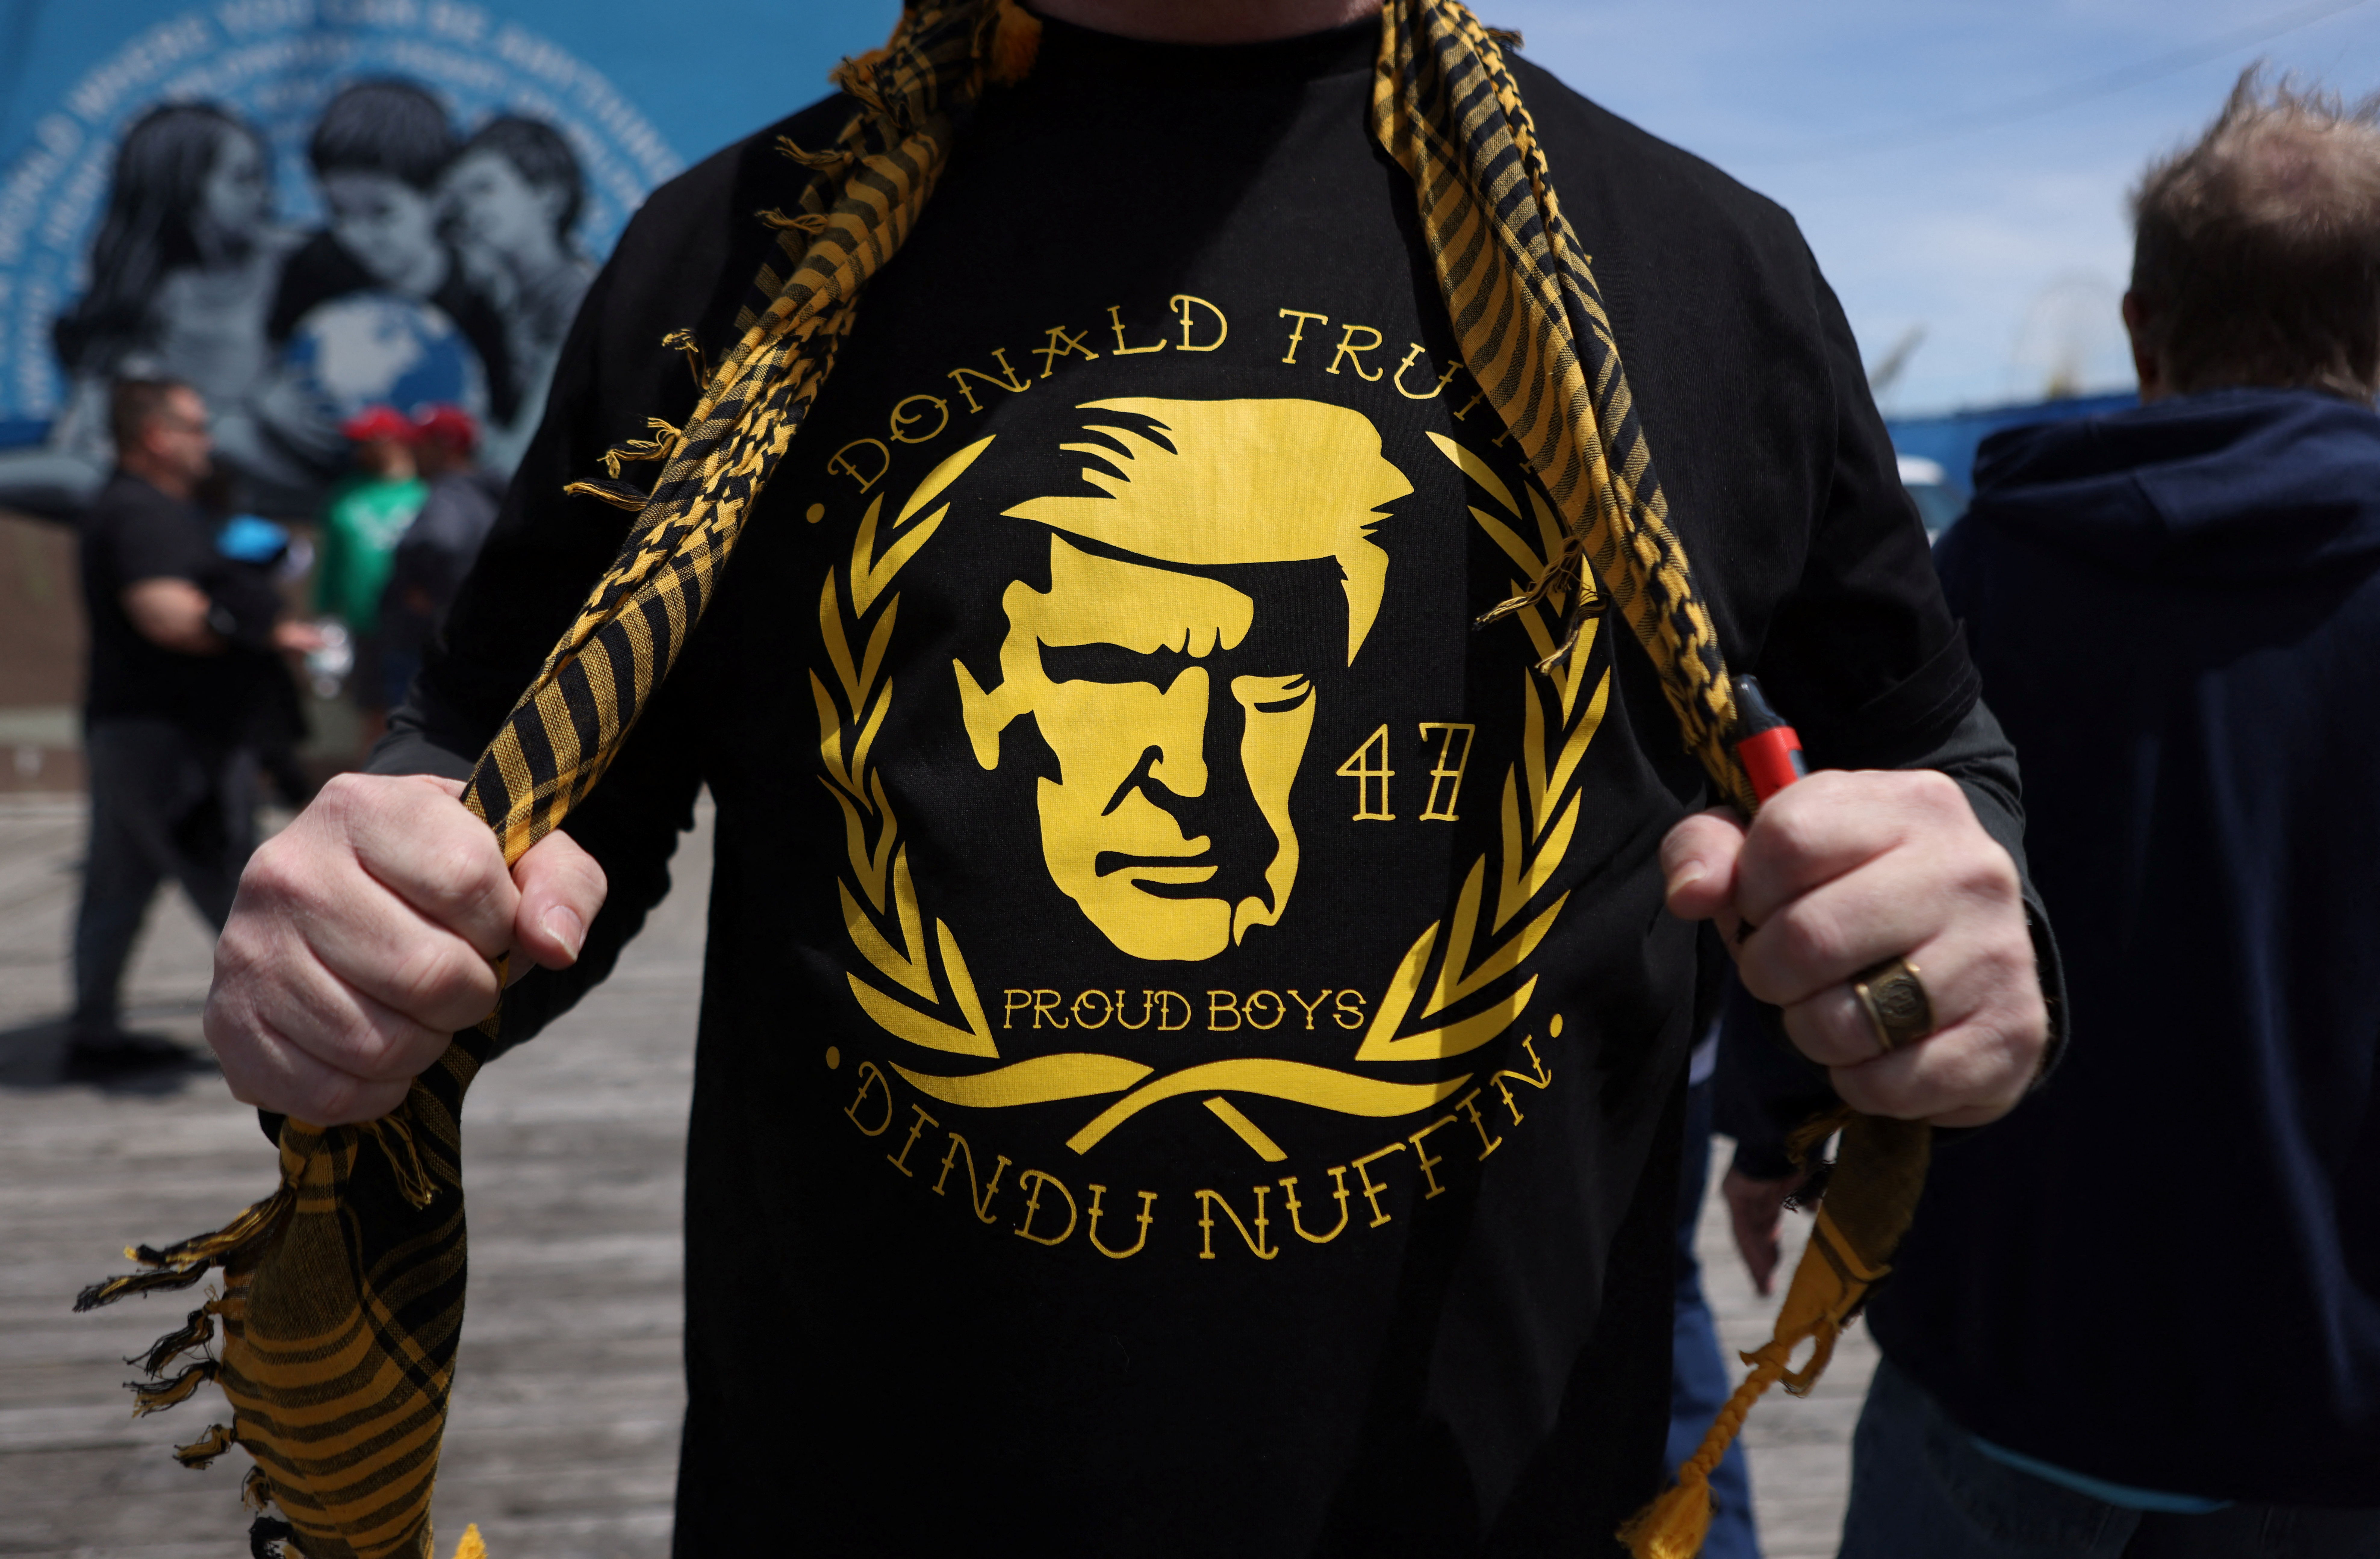 Proud Boys attend a Trump campaign rally in New Jersey